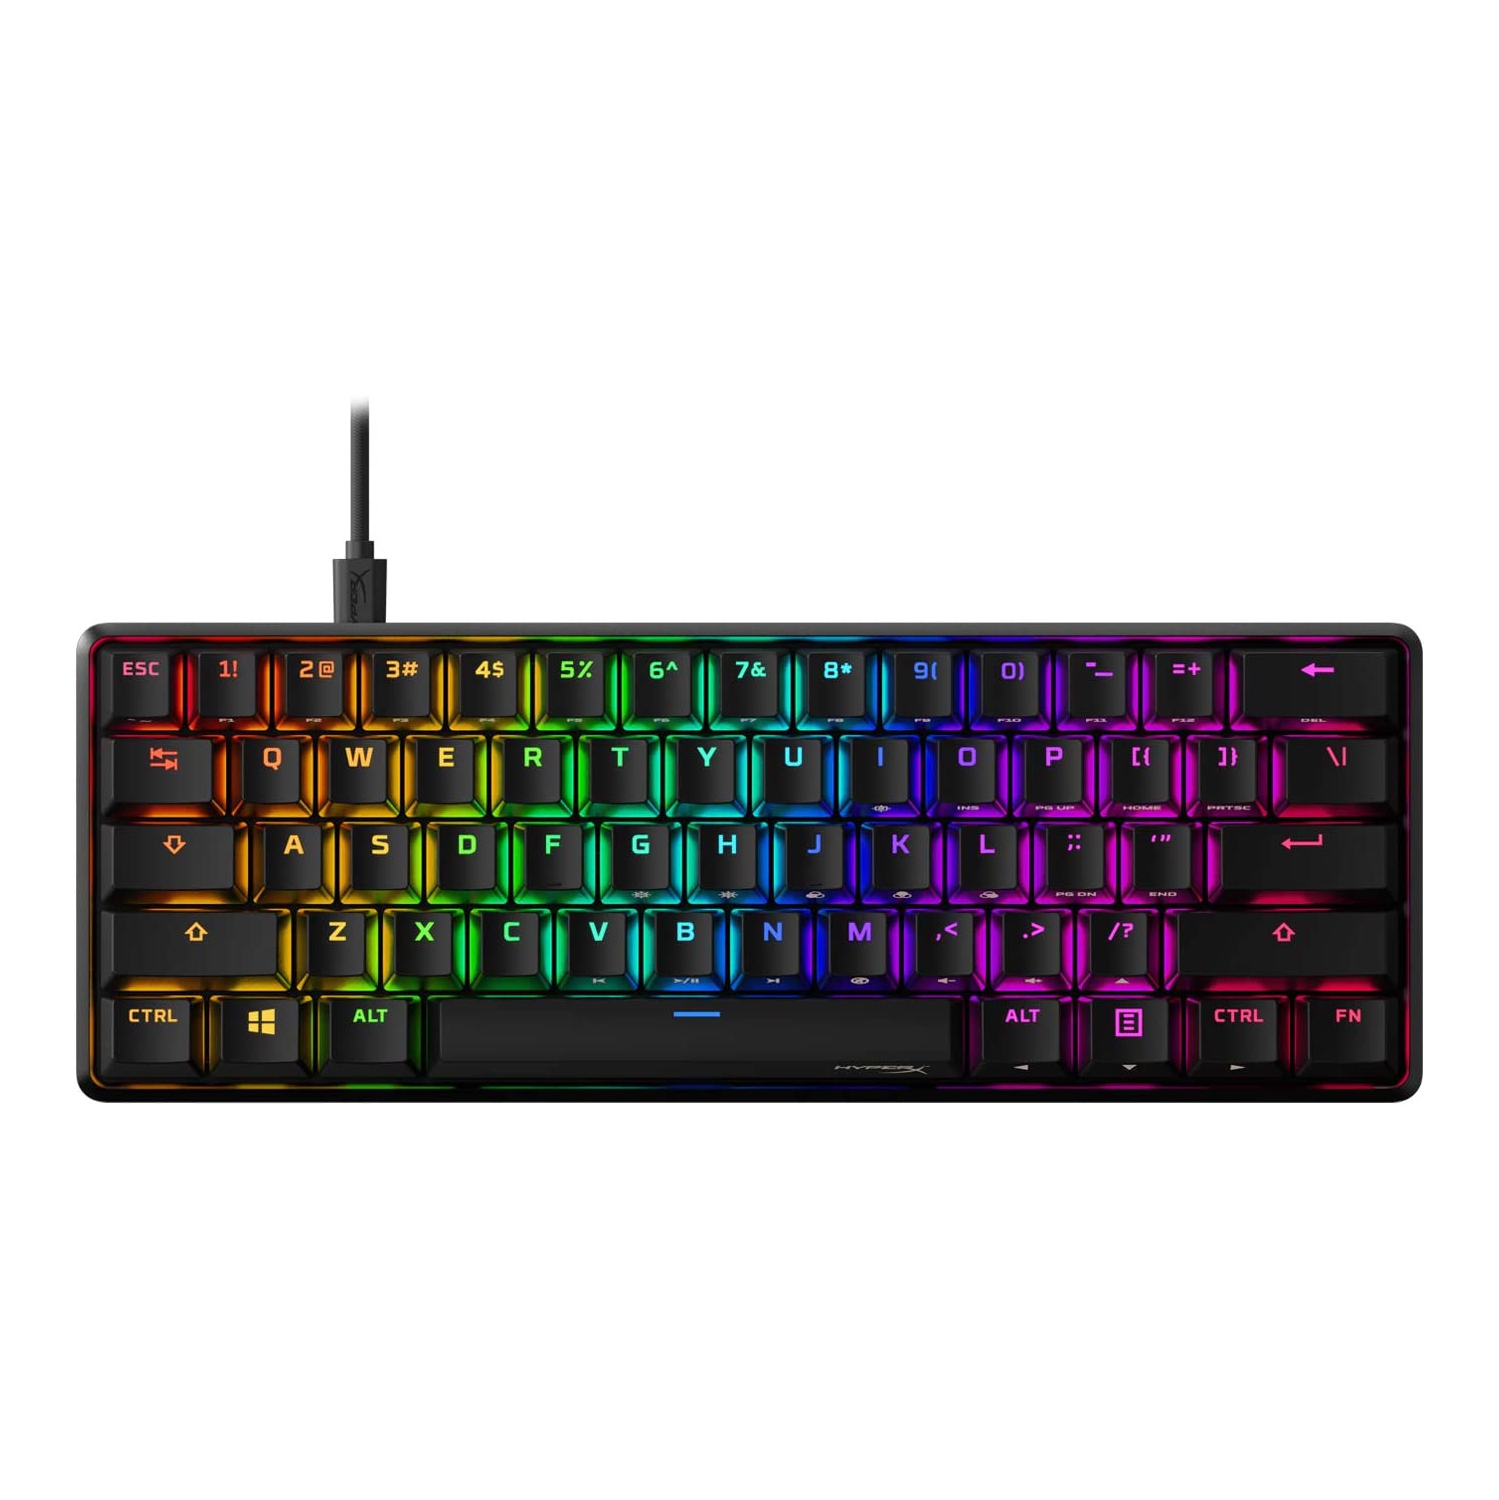 Alloy Origins 60 - Mechanical Gaming Keyboard, Ultra Compact 60% Form Factor, Double Shot PBT Keycaps, RGB LED Backlit, NGENUITY Software Compatible - Linear Red Swit